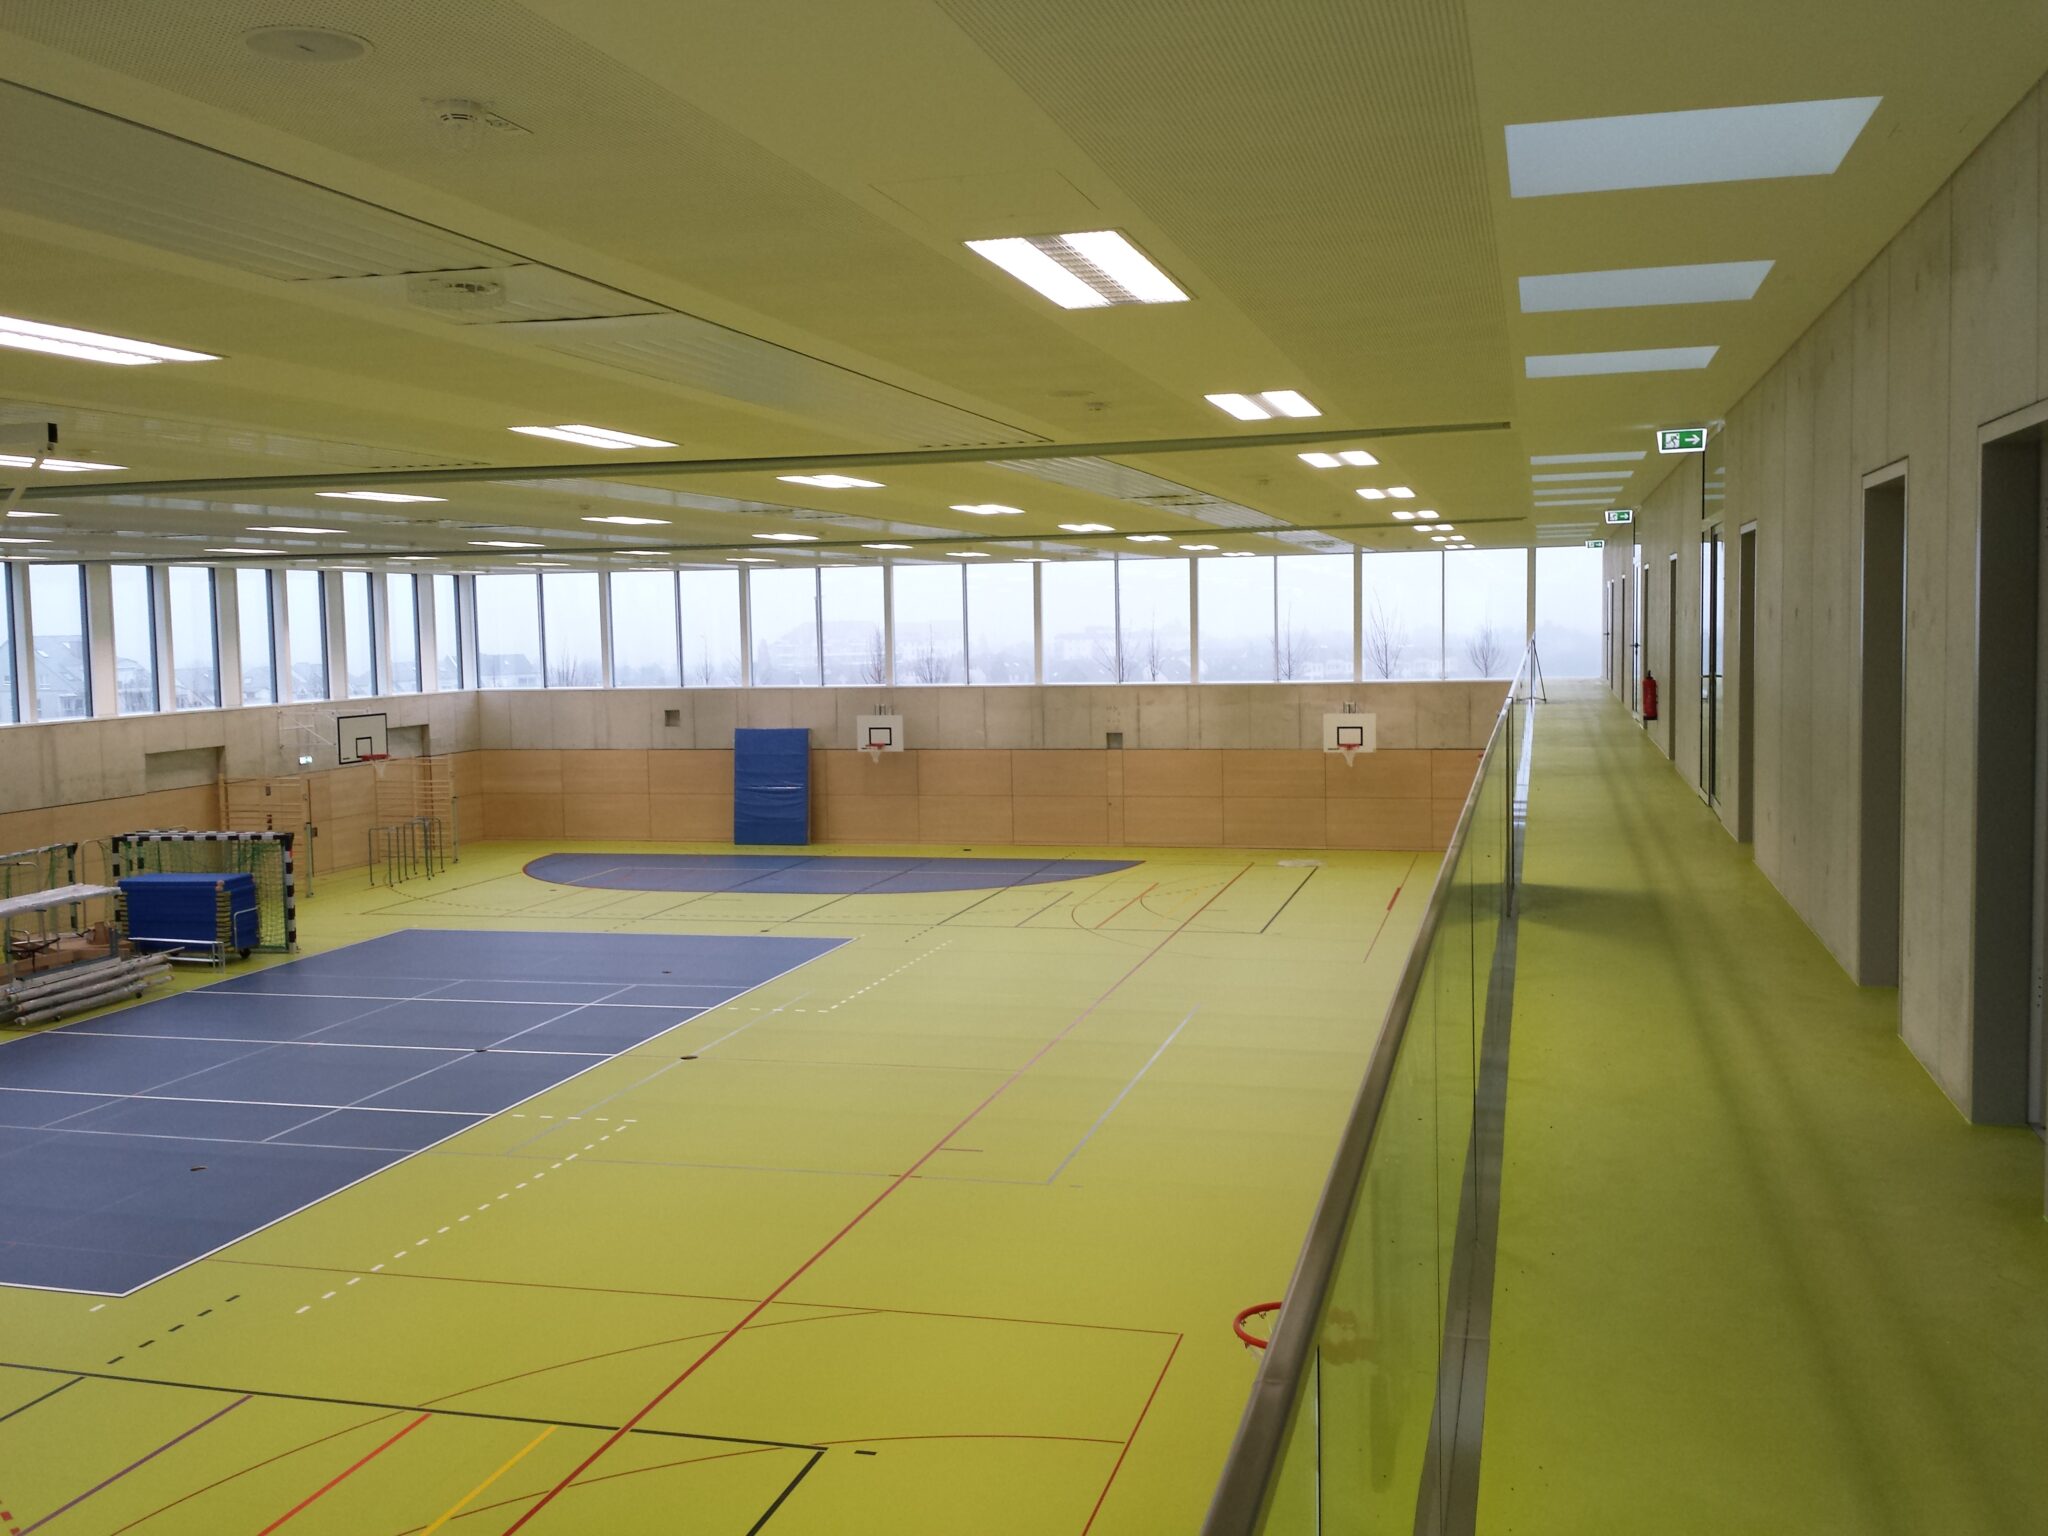 3 Sporthalle Bad Soden